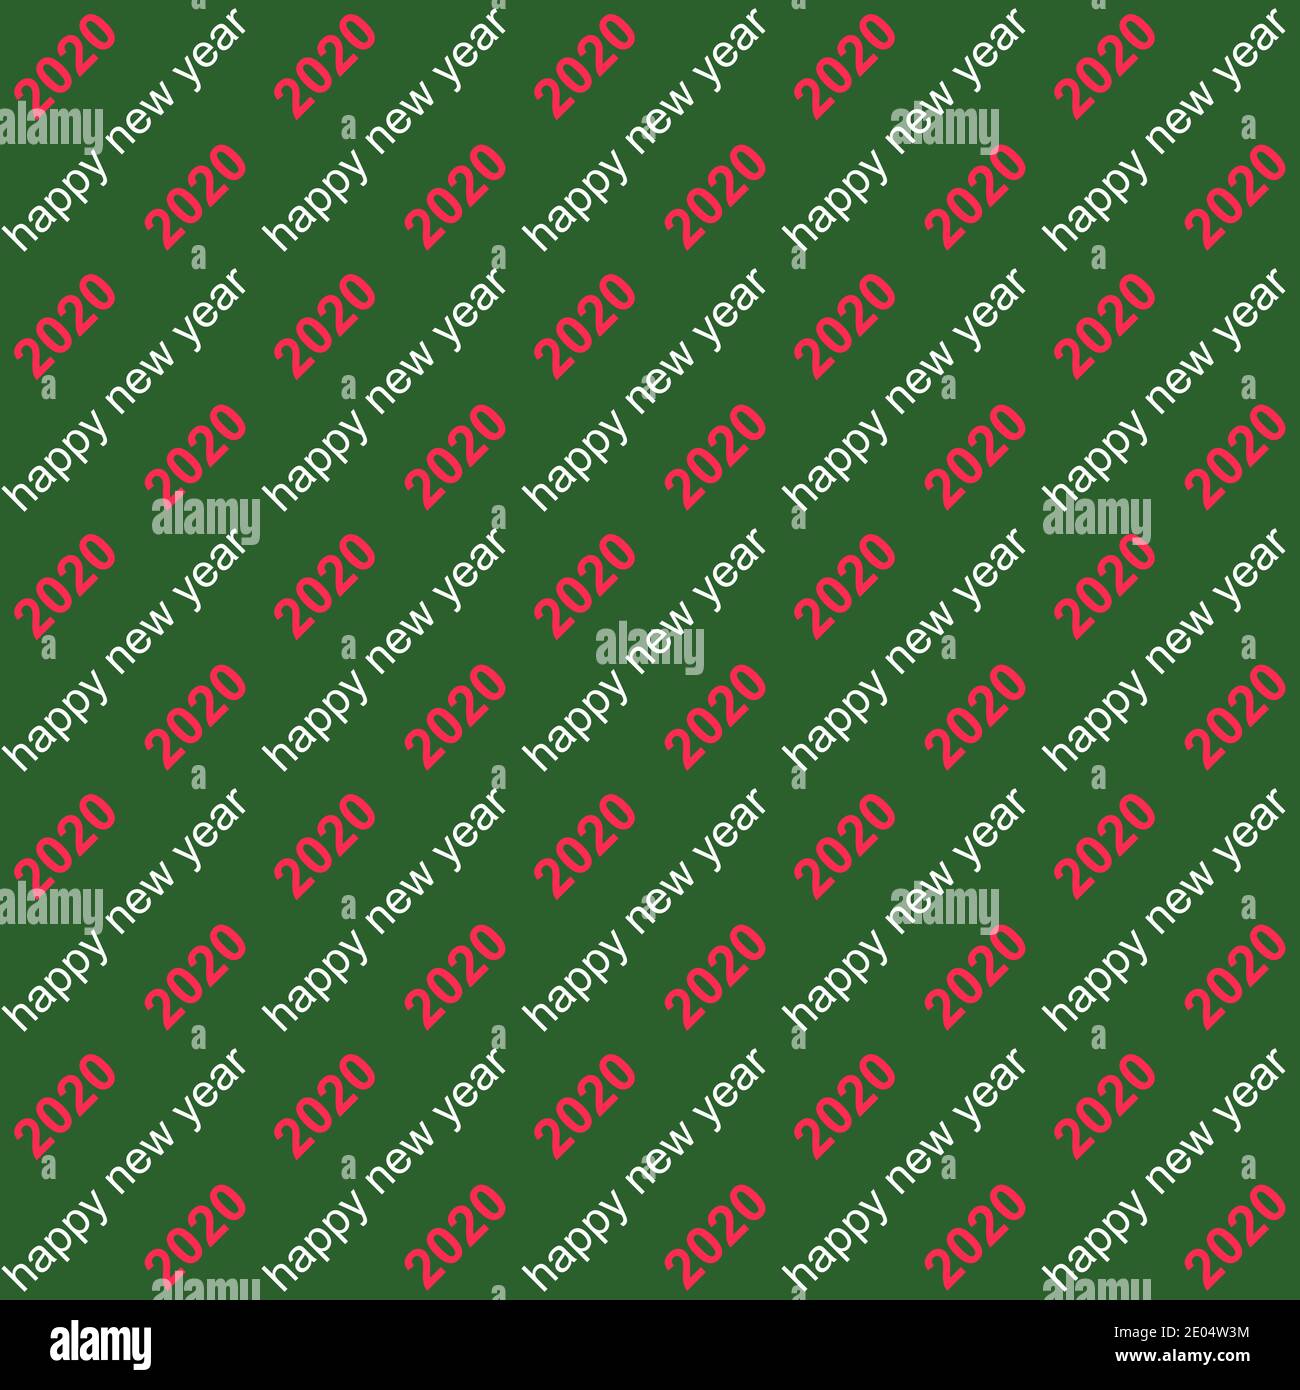 Seamless background 2020 happy new year text on a diagonal,vector seamless holiday pattern 2020 new year for replacement chrome key printing on gift Stock Vector